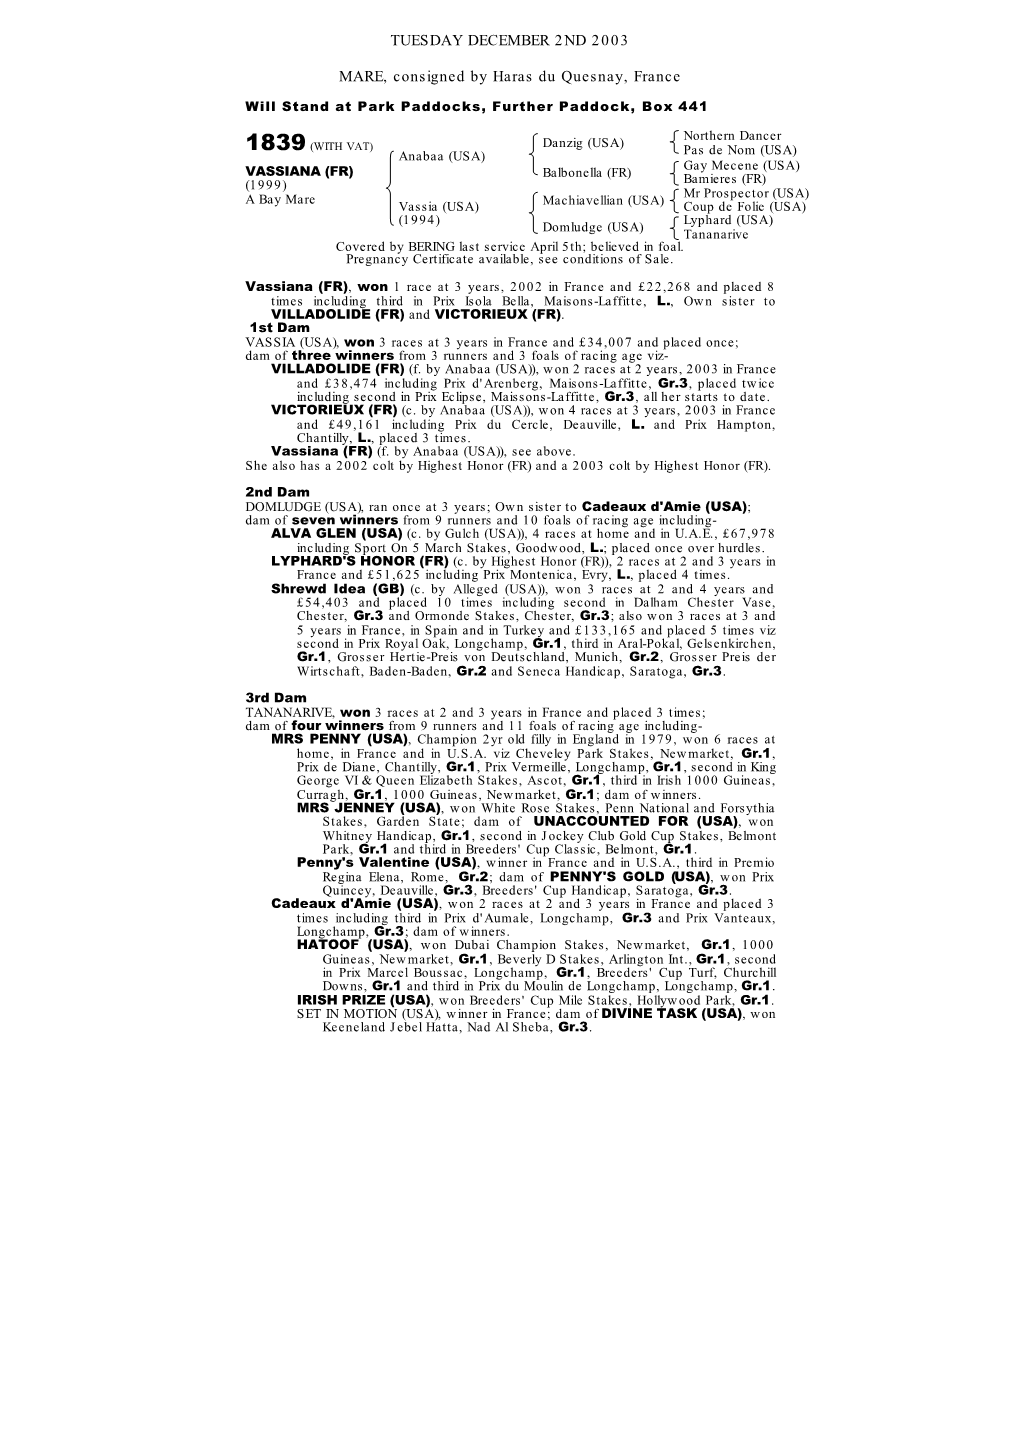 TUESDAY DECEMBER 2ND 2003 MARE, Consigned by Haras Du